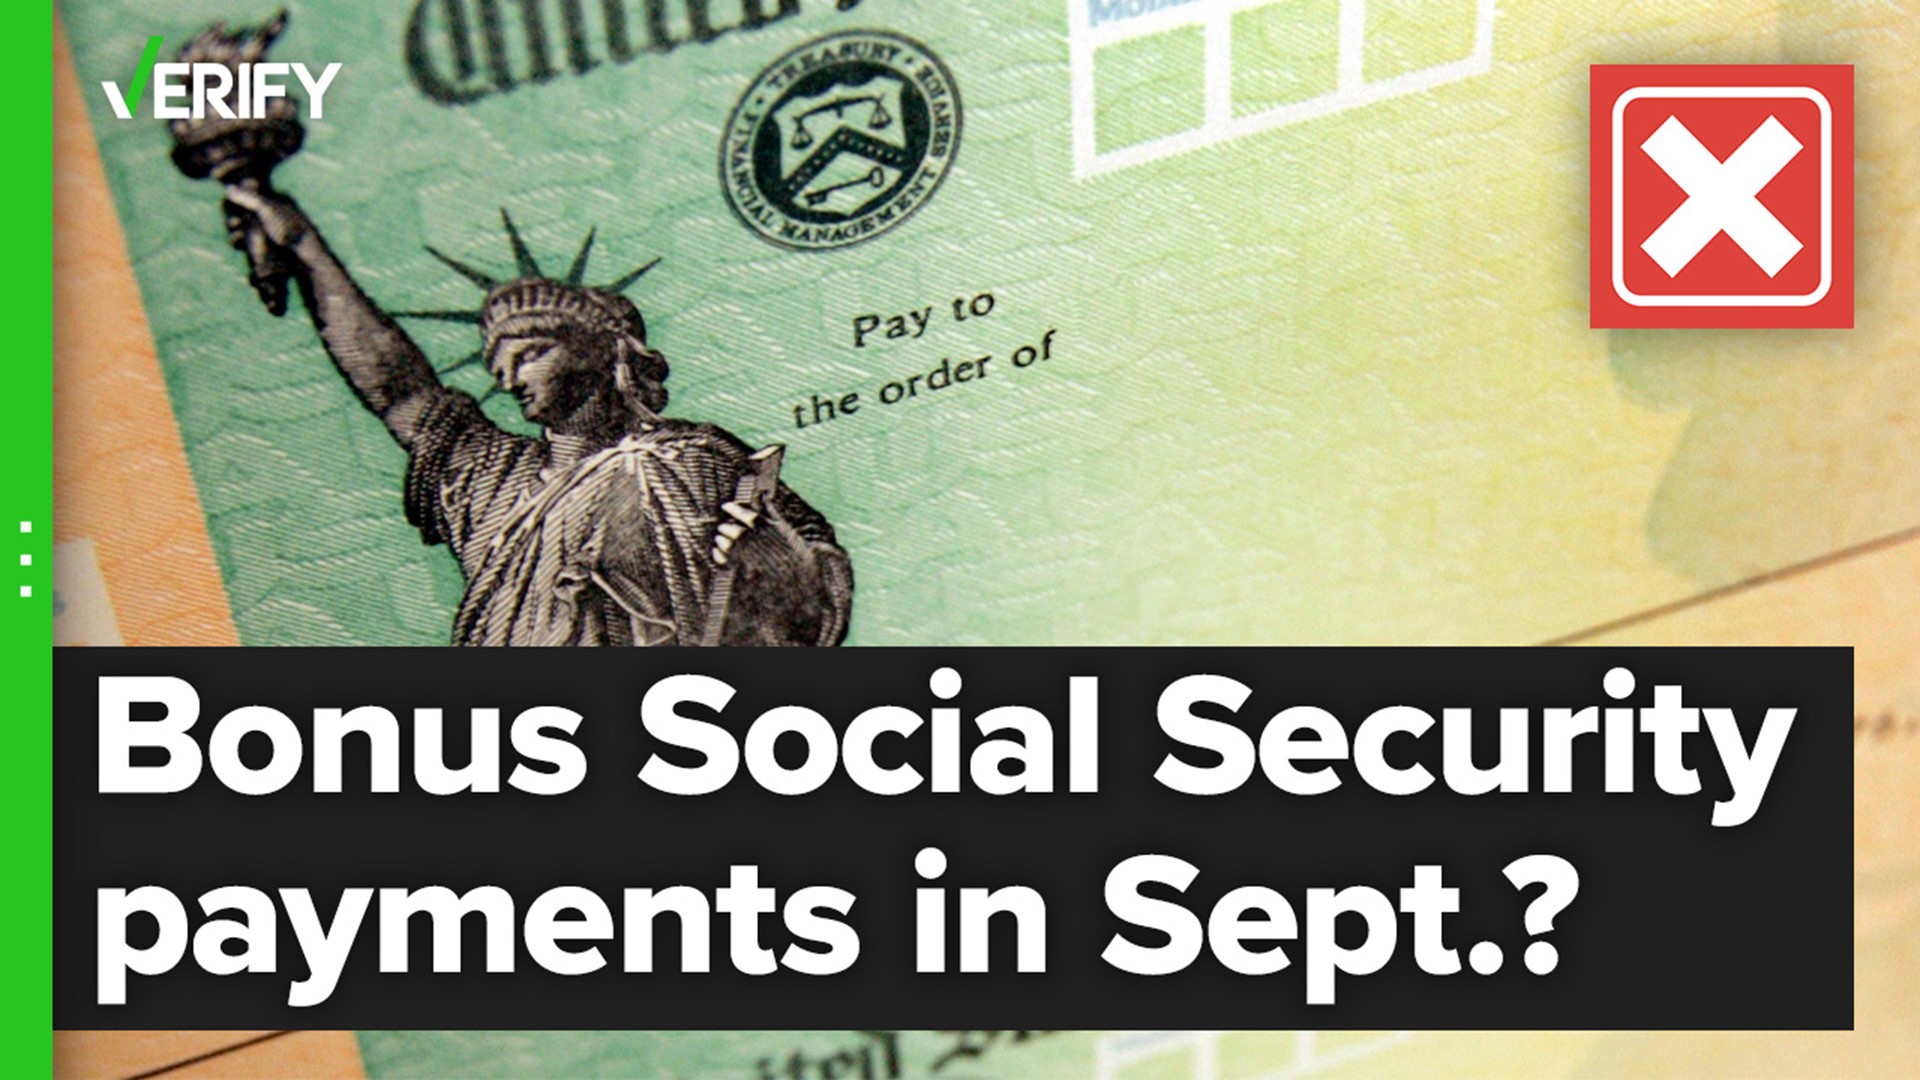 Millions of Supplemental Security Income (SSI) recipients will get two payments in September, but this is due to the calendar — it is not a bonus payment.